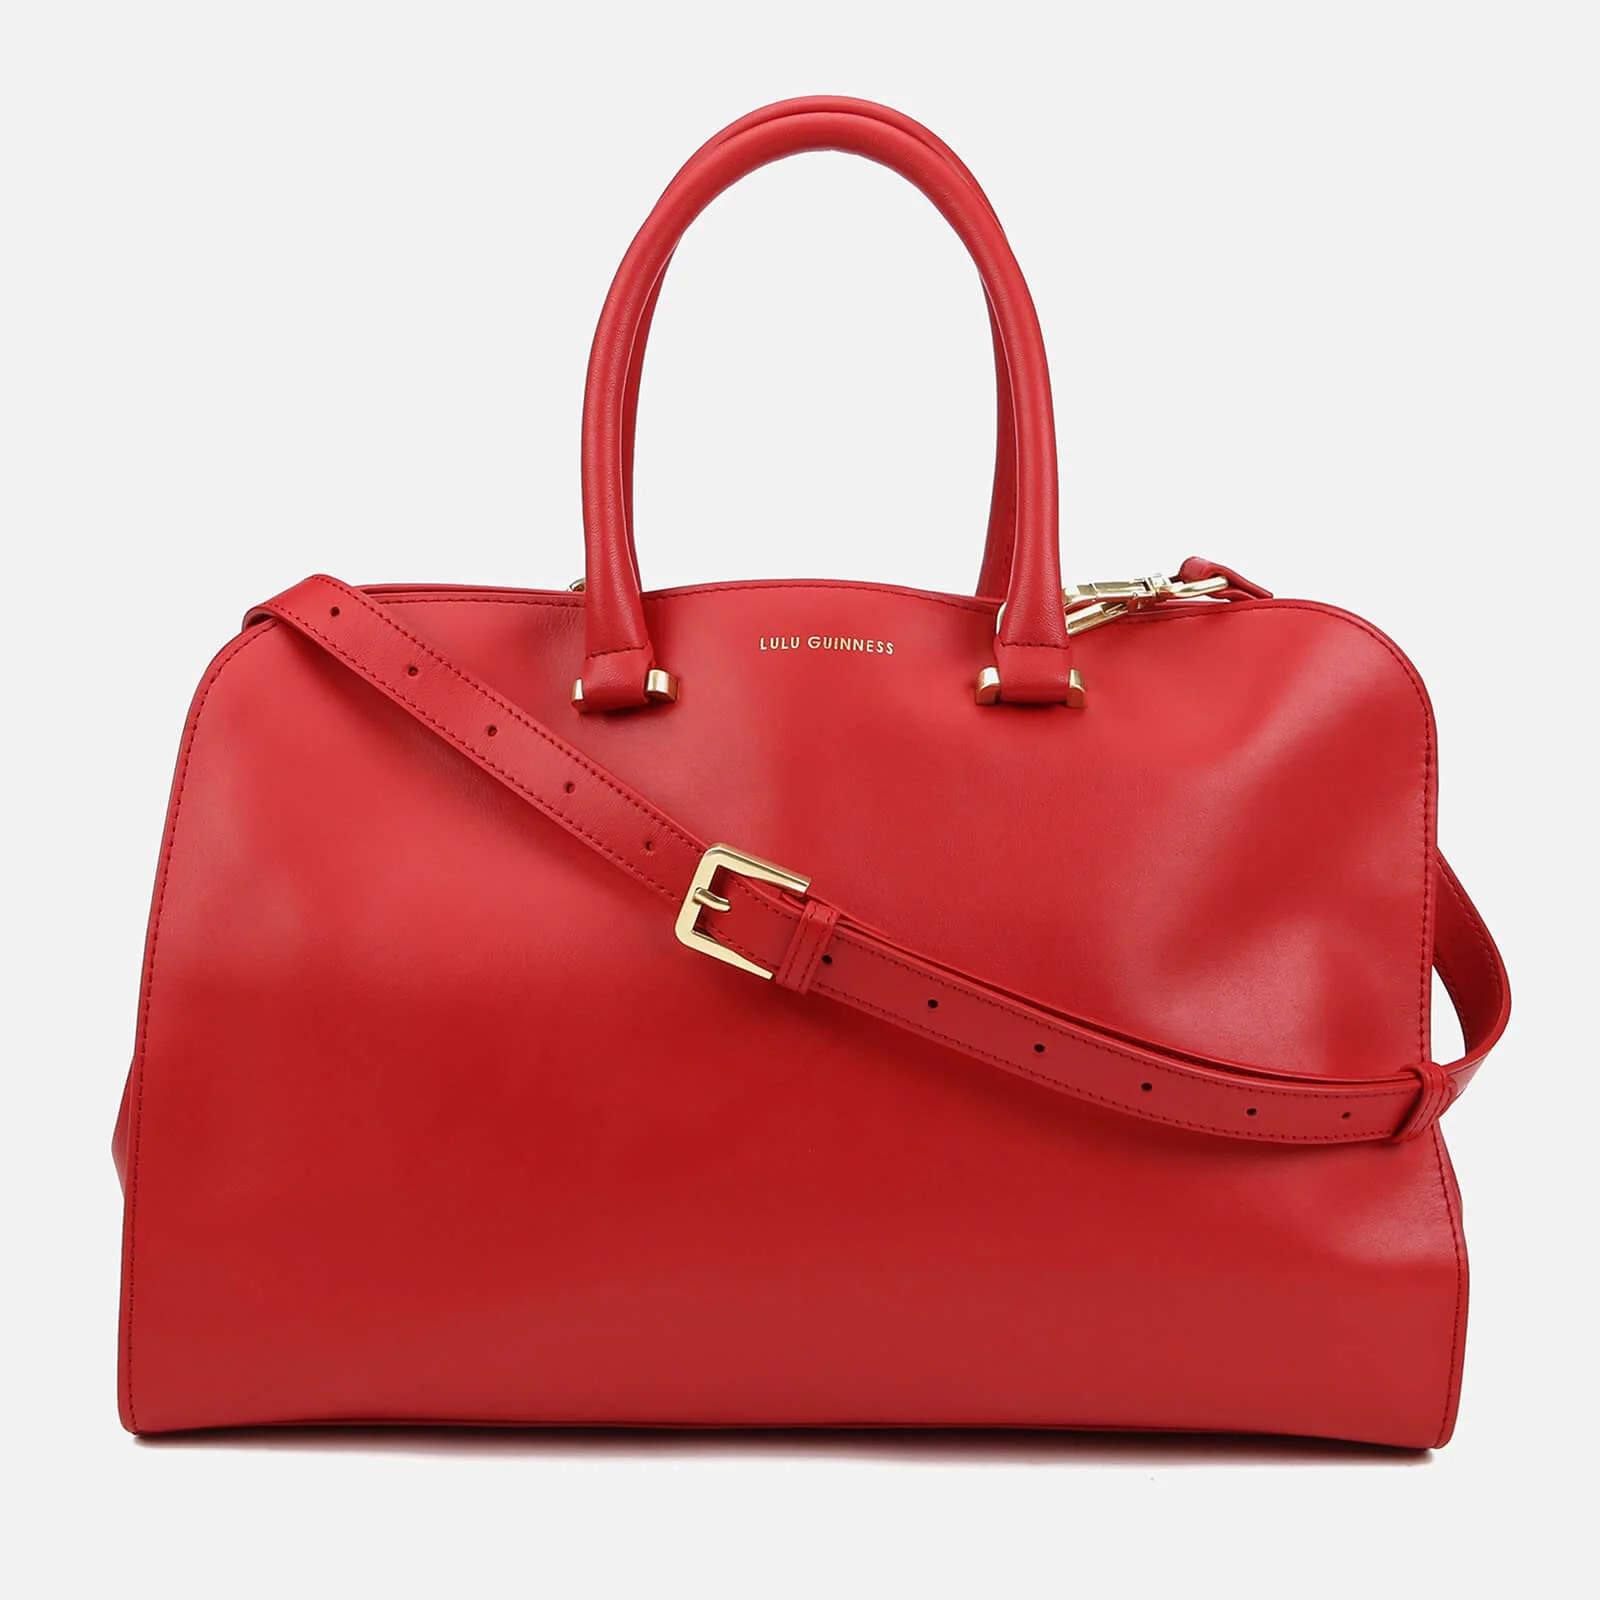 Lulu Guinness Women's Vivienne Medium Smooth Leather Tote Bag - Red Image 1